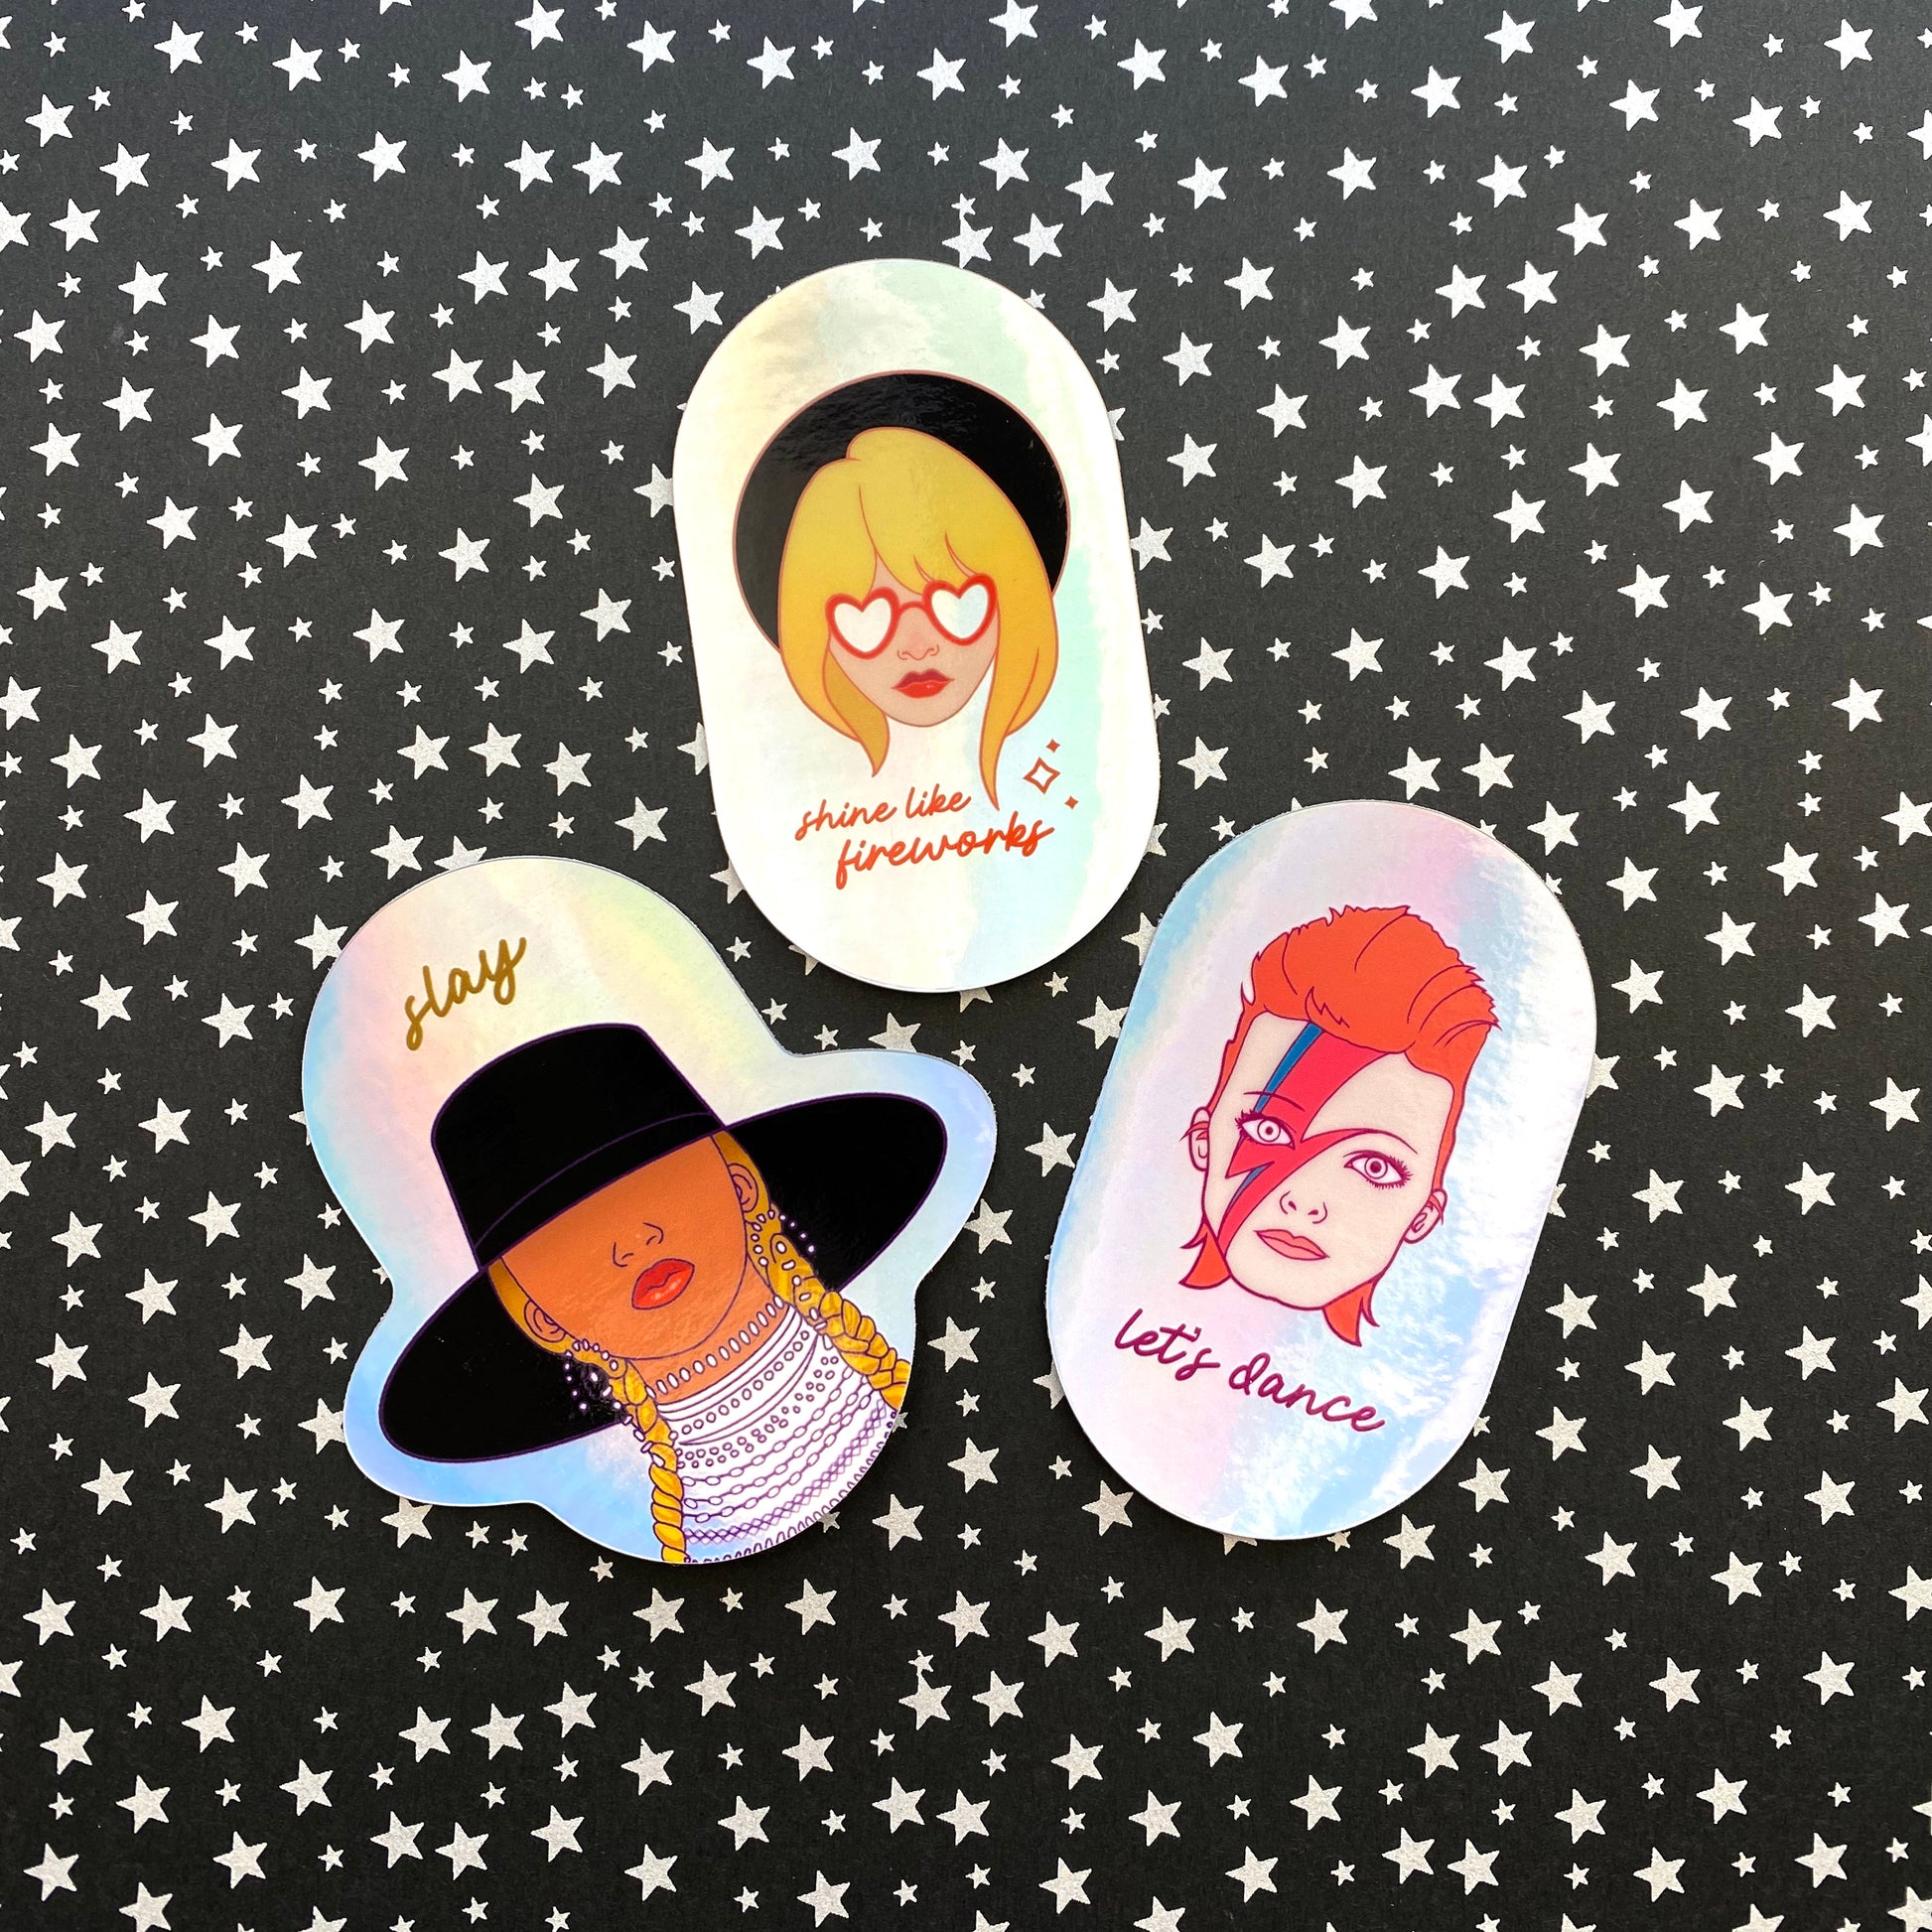 A photo of three holographic stickers illustrated with portraits of Beyoncé, Taylor Swift and David Bowie. The sticker sits on a black and silver star background.